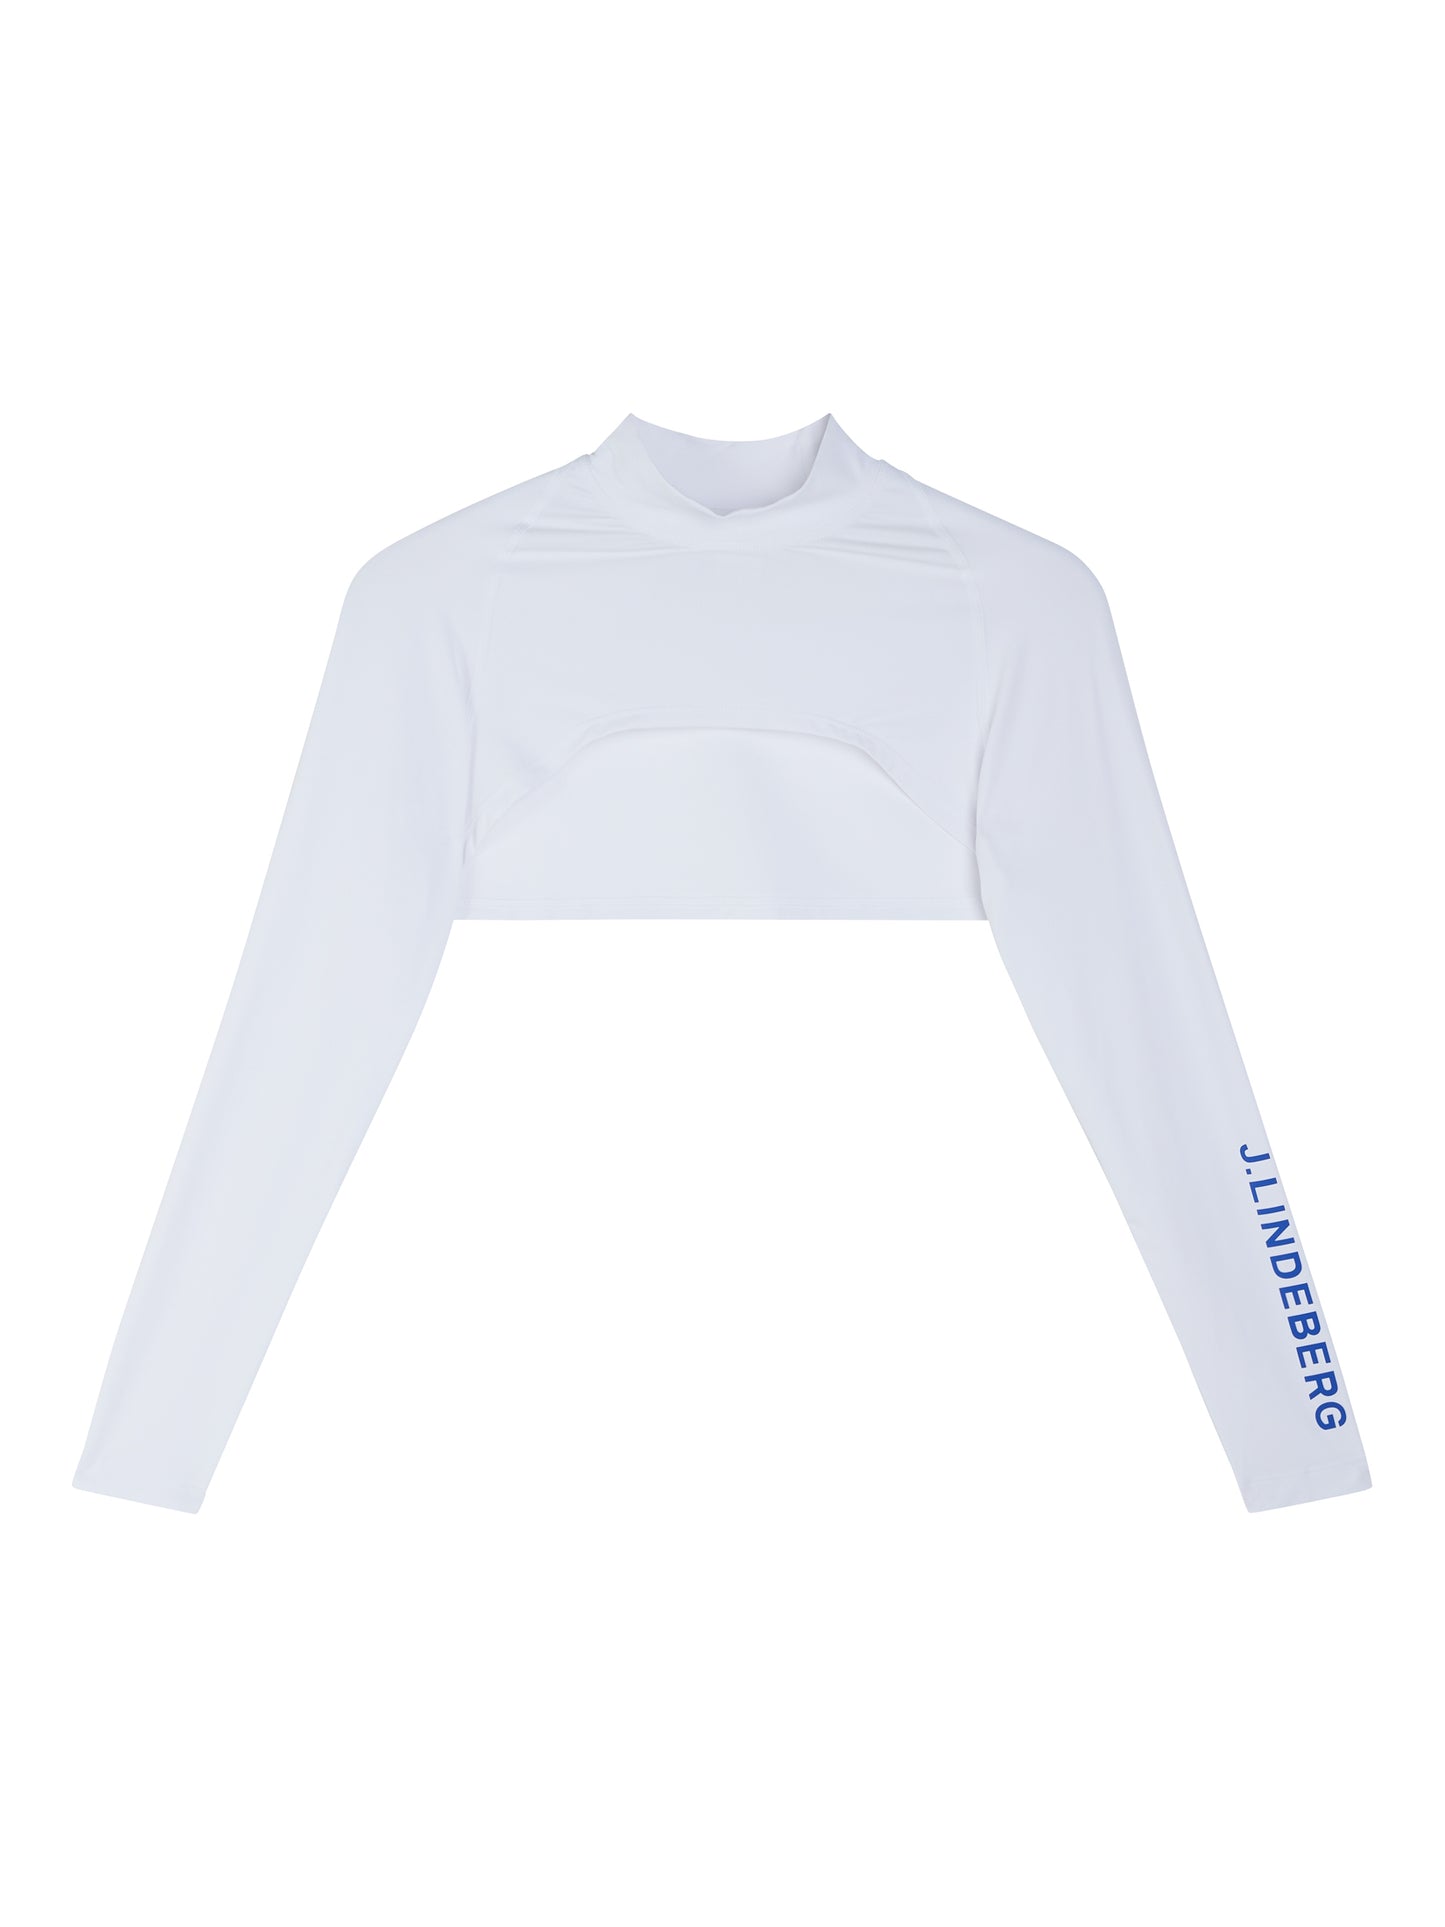 Holly Top / White